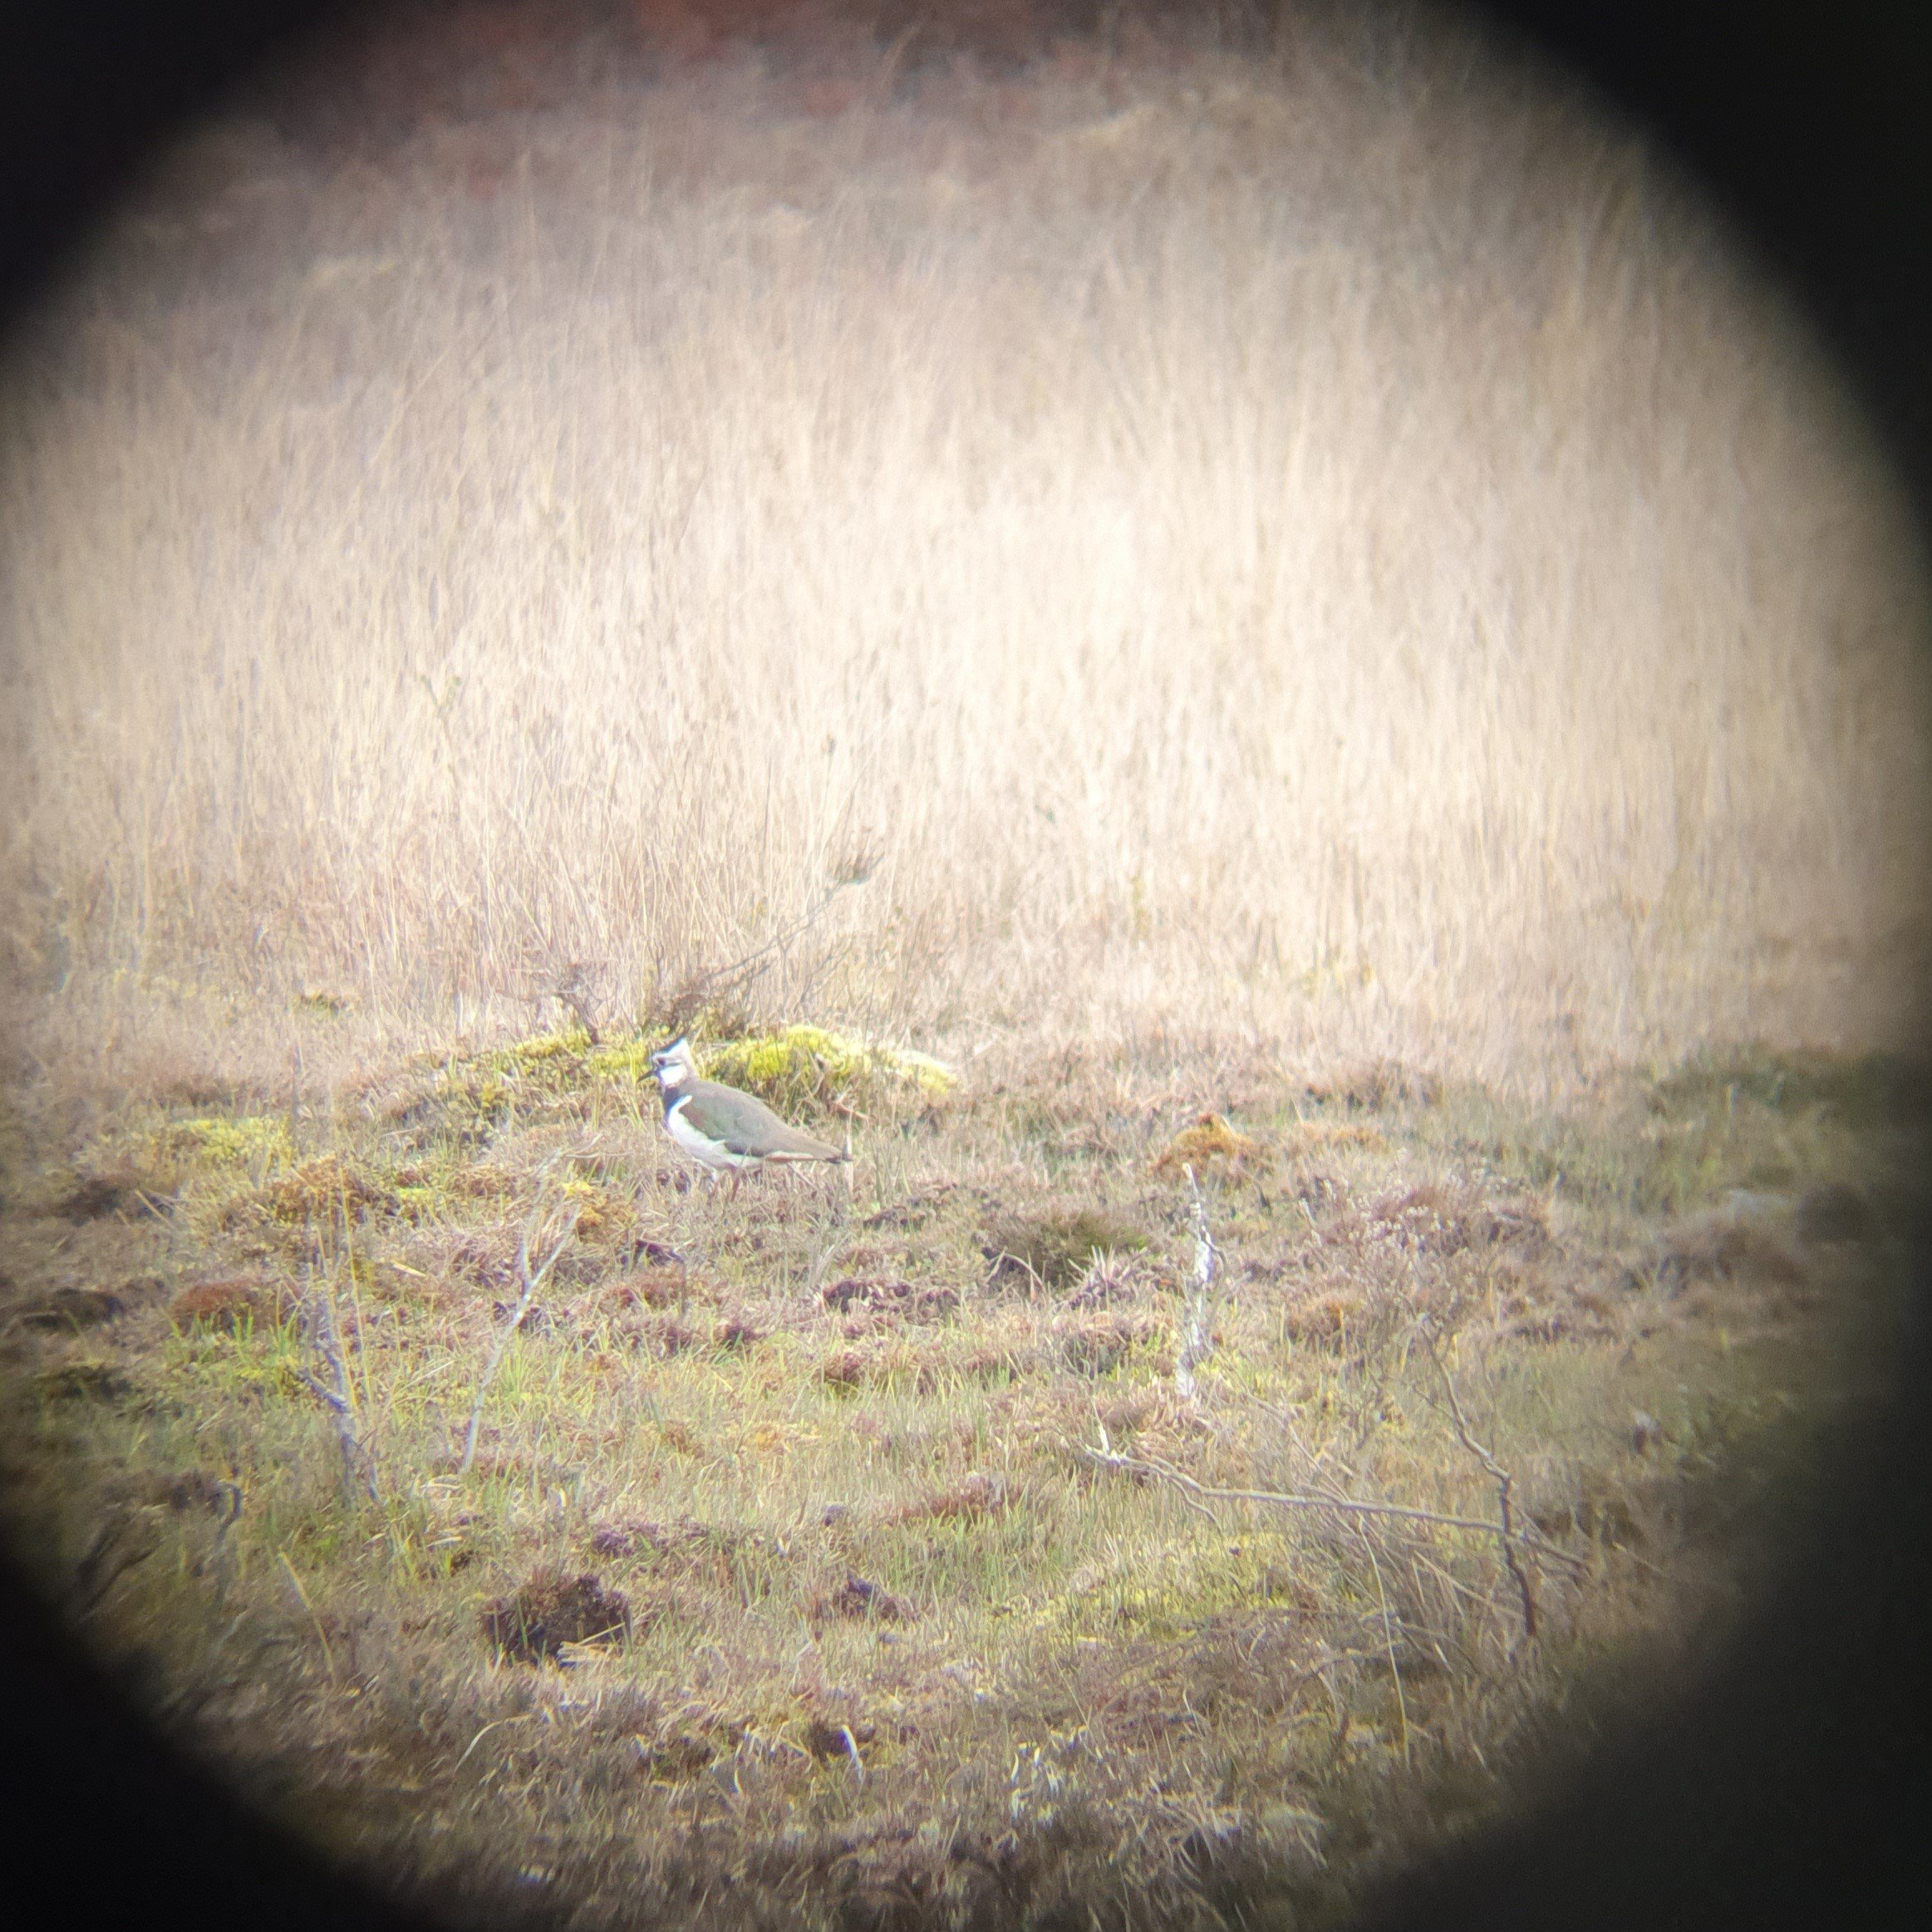 A lapwing spotted through binoculars